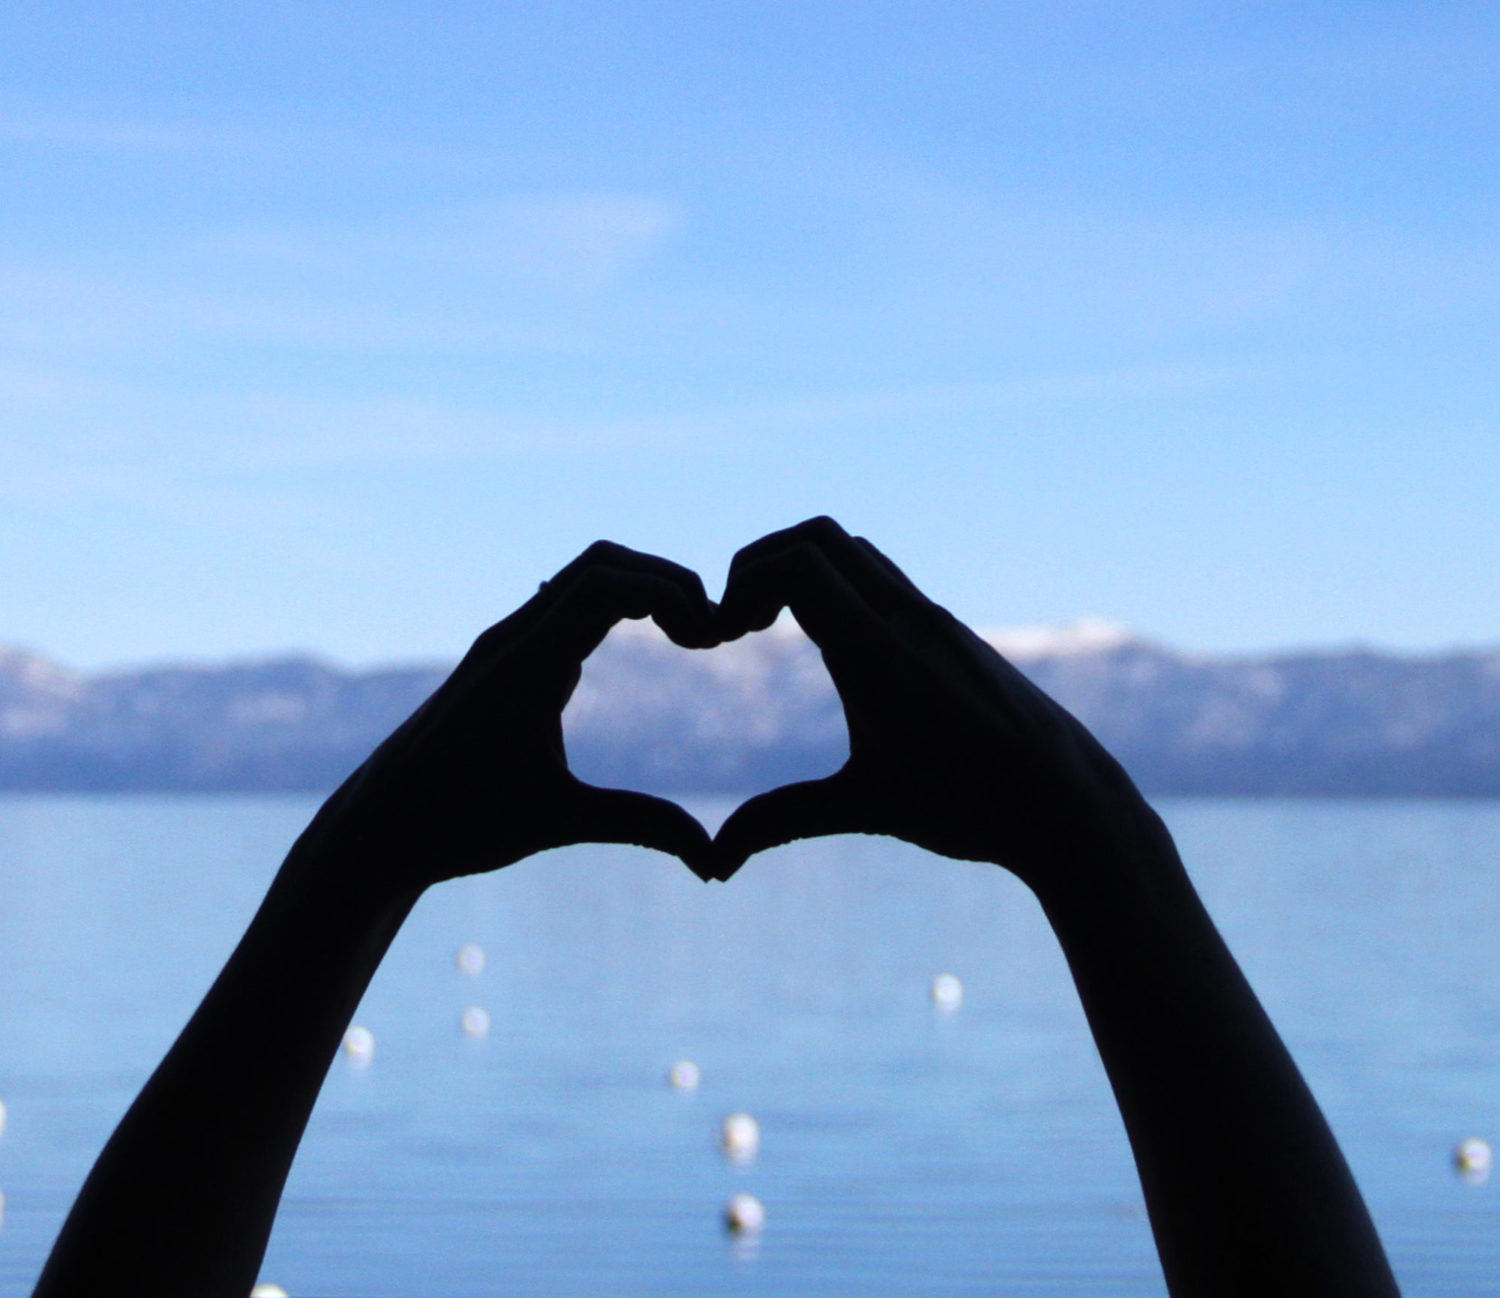 Two hands form a heart in front of Lake Tahoe.